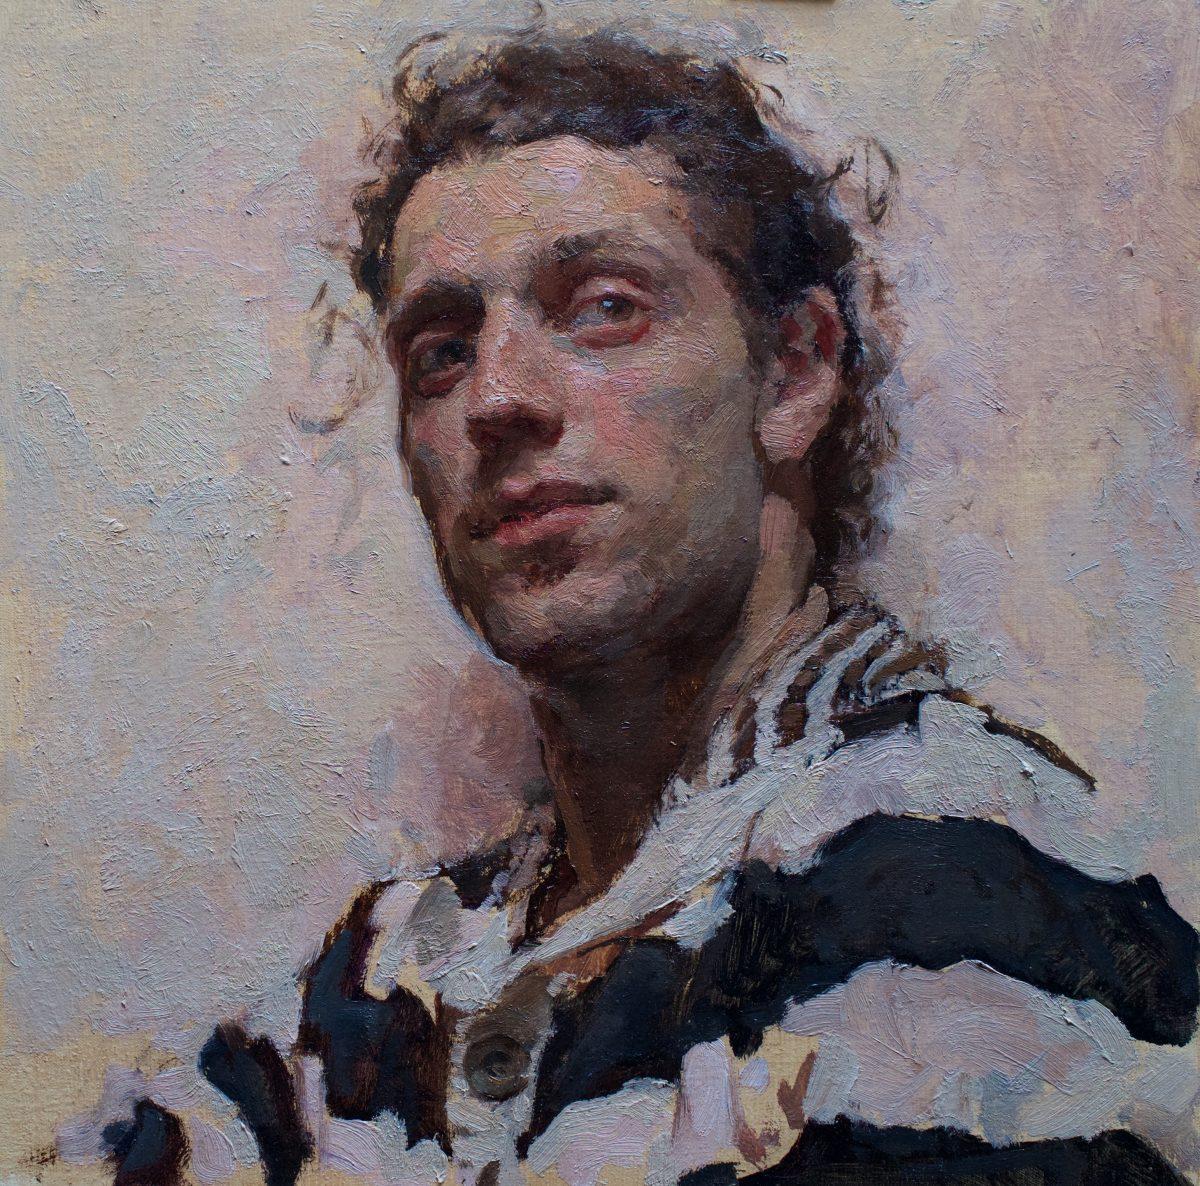 "Portrait of a Young Man" by Travis Schlaht. (The Florence Academy of Art–U.S.)